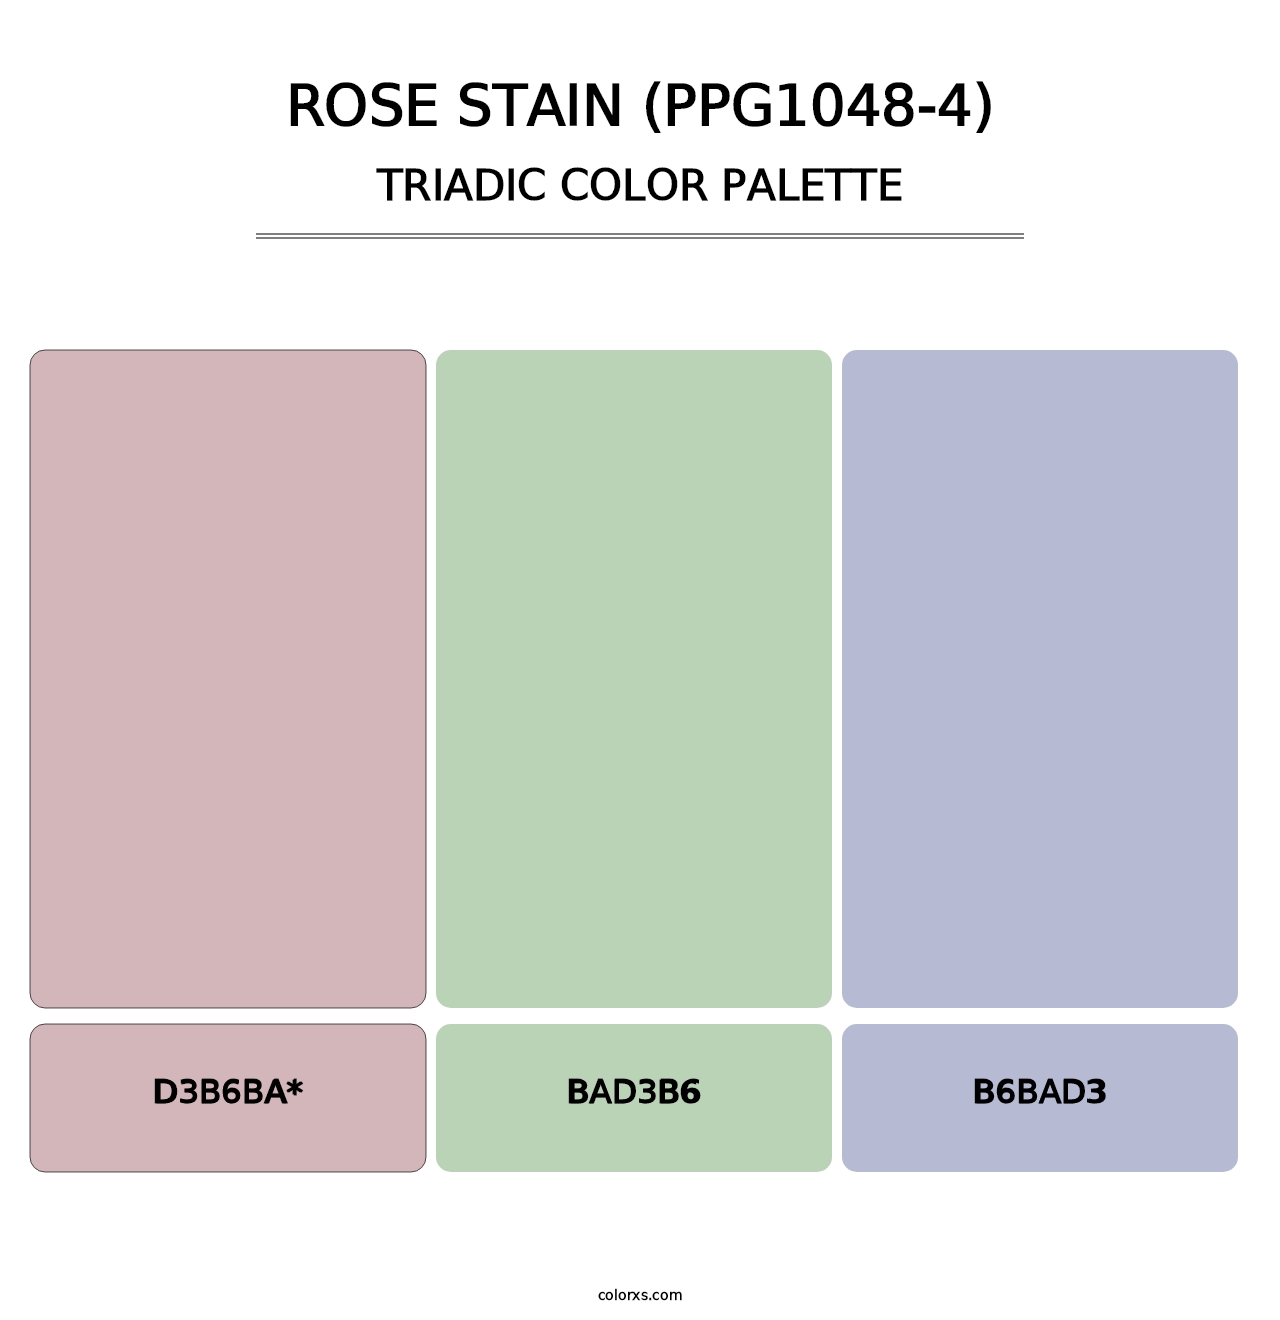 Rose Stain (PPG1048-4) - Triadic Color Palette